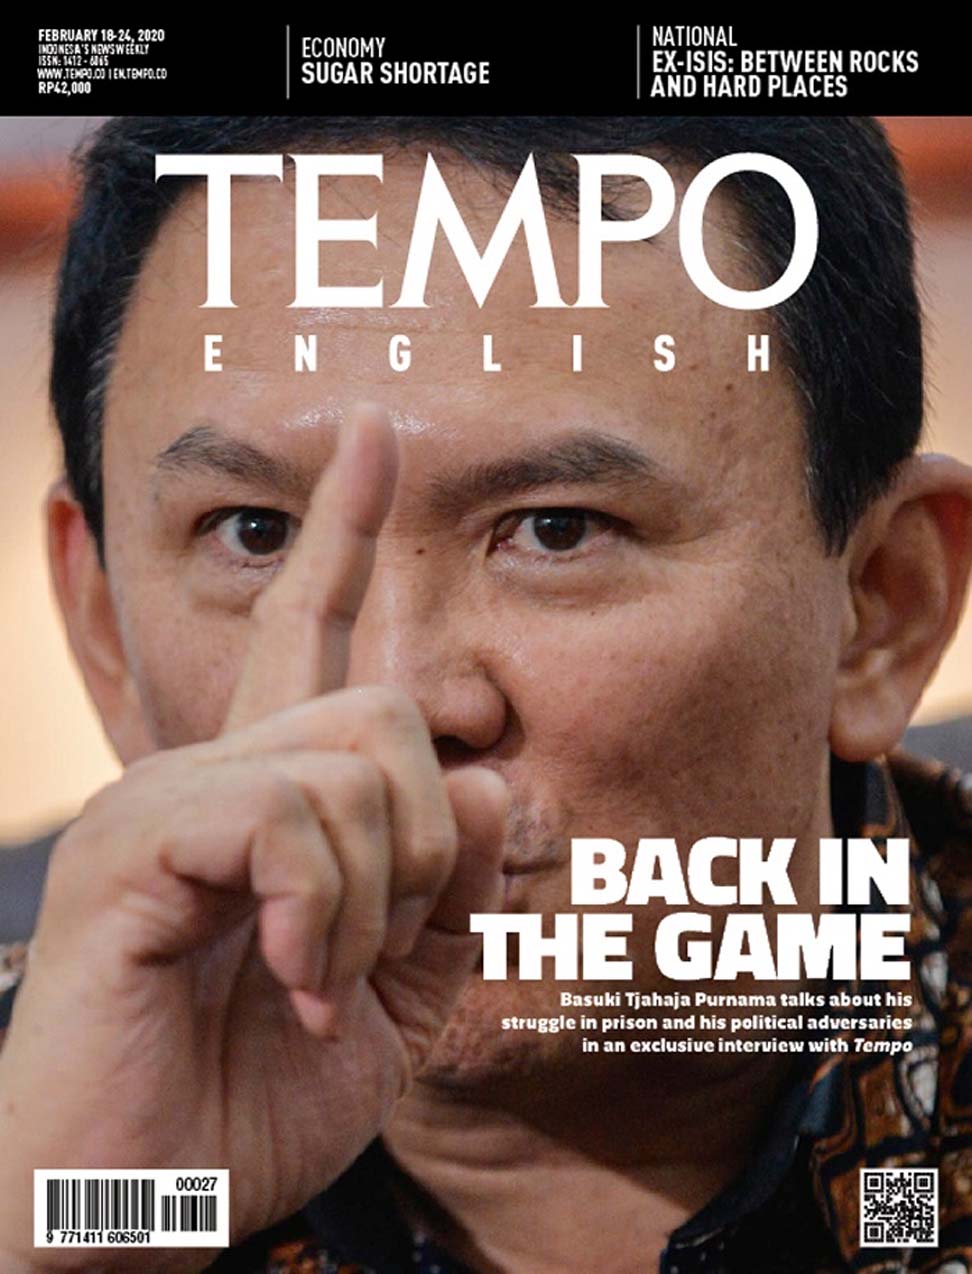 Cover Magz Tempo - Edisi 18-02-2020 - Back in The Game